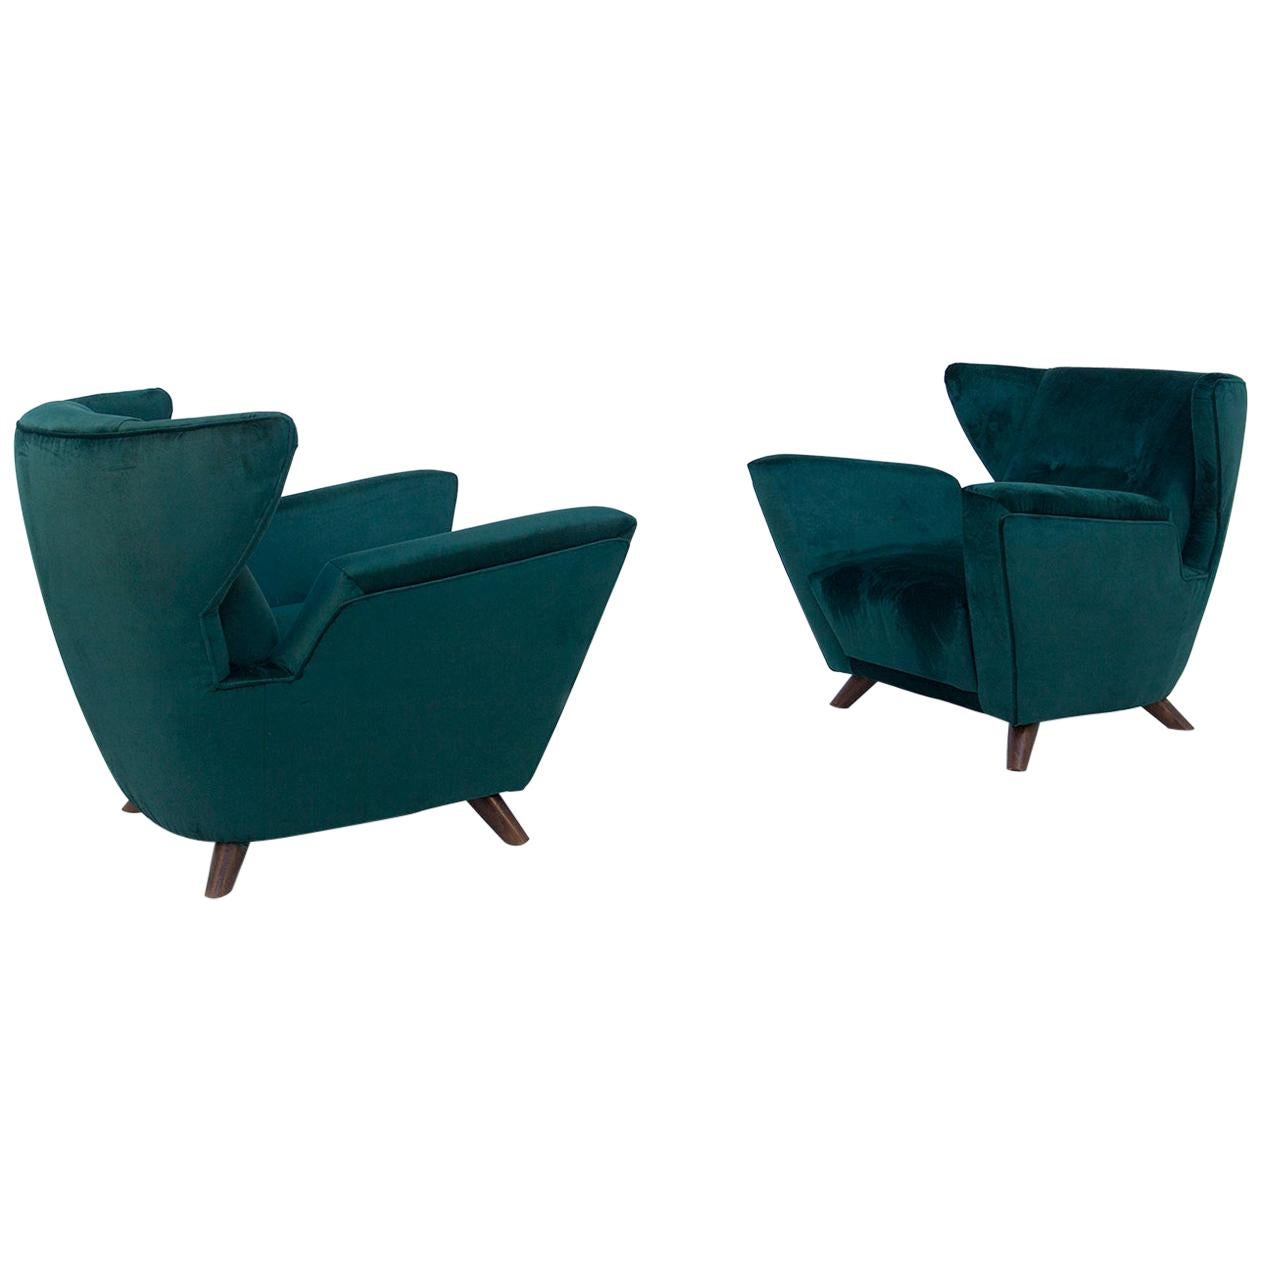 Pair of Italian Armchairs Attributed to Gio Ponti in Green Velvet, 1950s